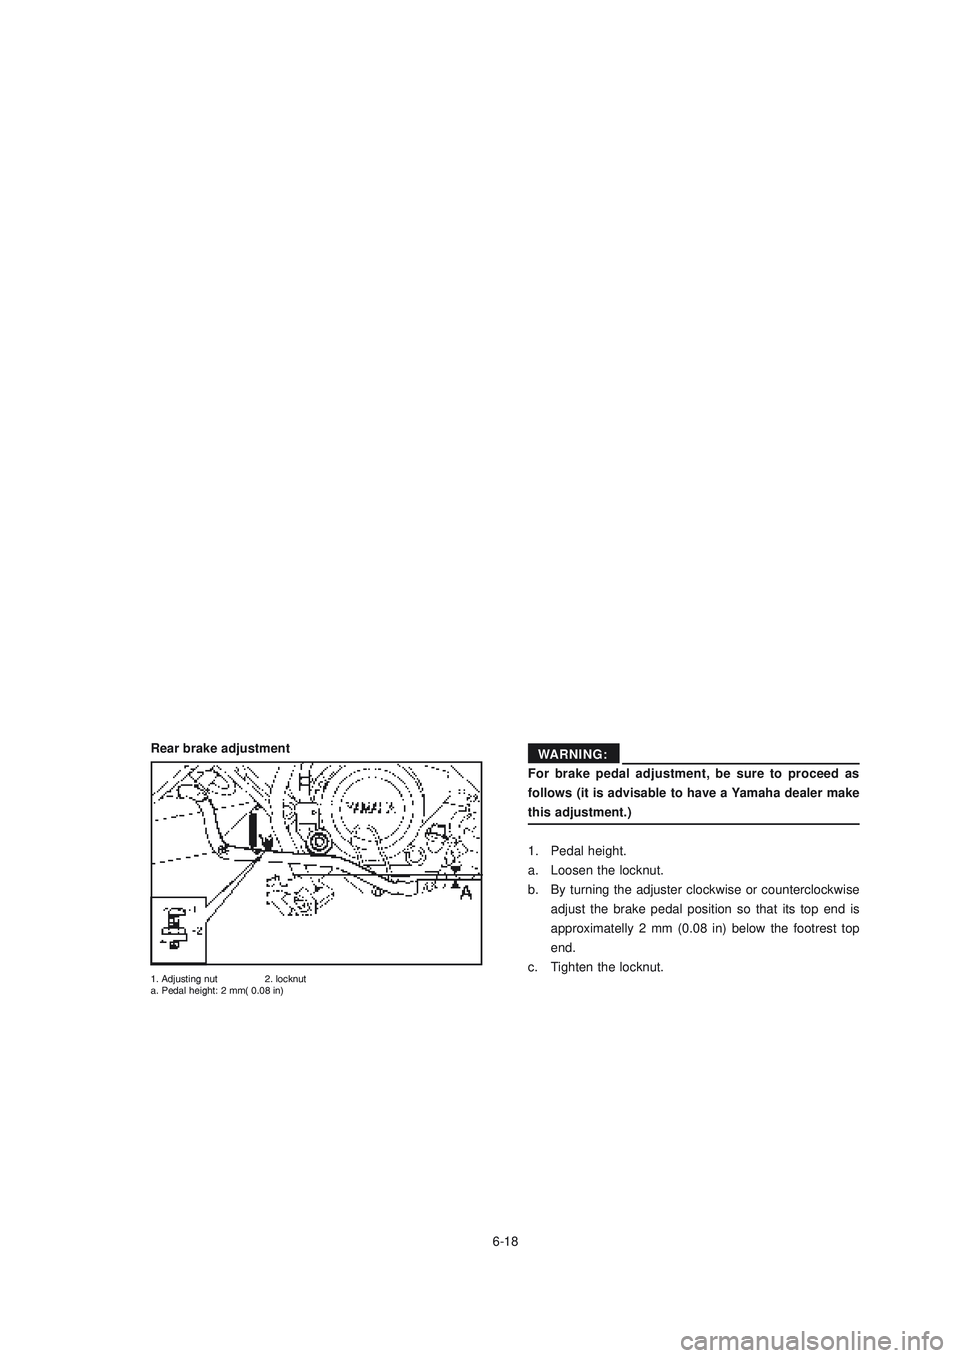 YAMAHA XTZ125 2008  Owners Manual 6-18
6-18For brake pedal adjustment, be sure to proceed as
follows (it is advisable to have a Yamaha dealer make
this adjustment.)
1. Pedal height.
a. Loosen the locknut.
b. By turning the adjuster cl